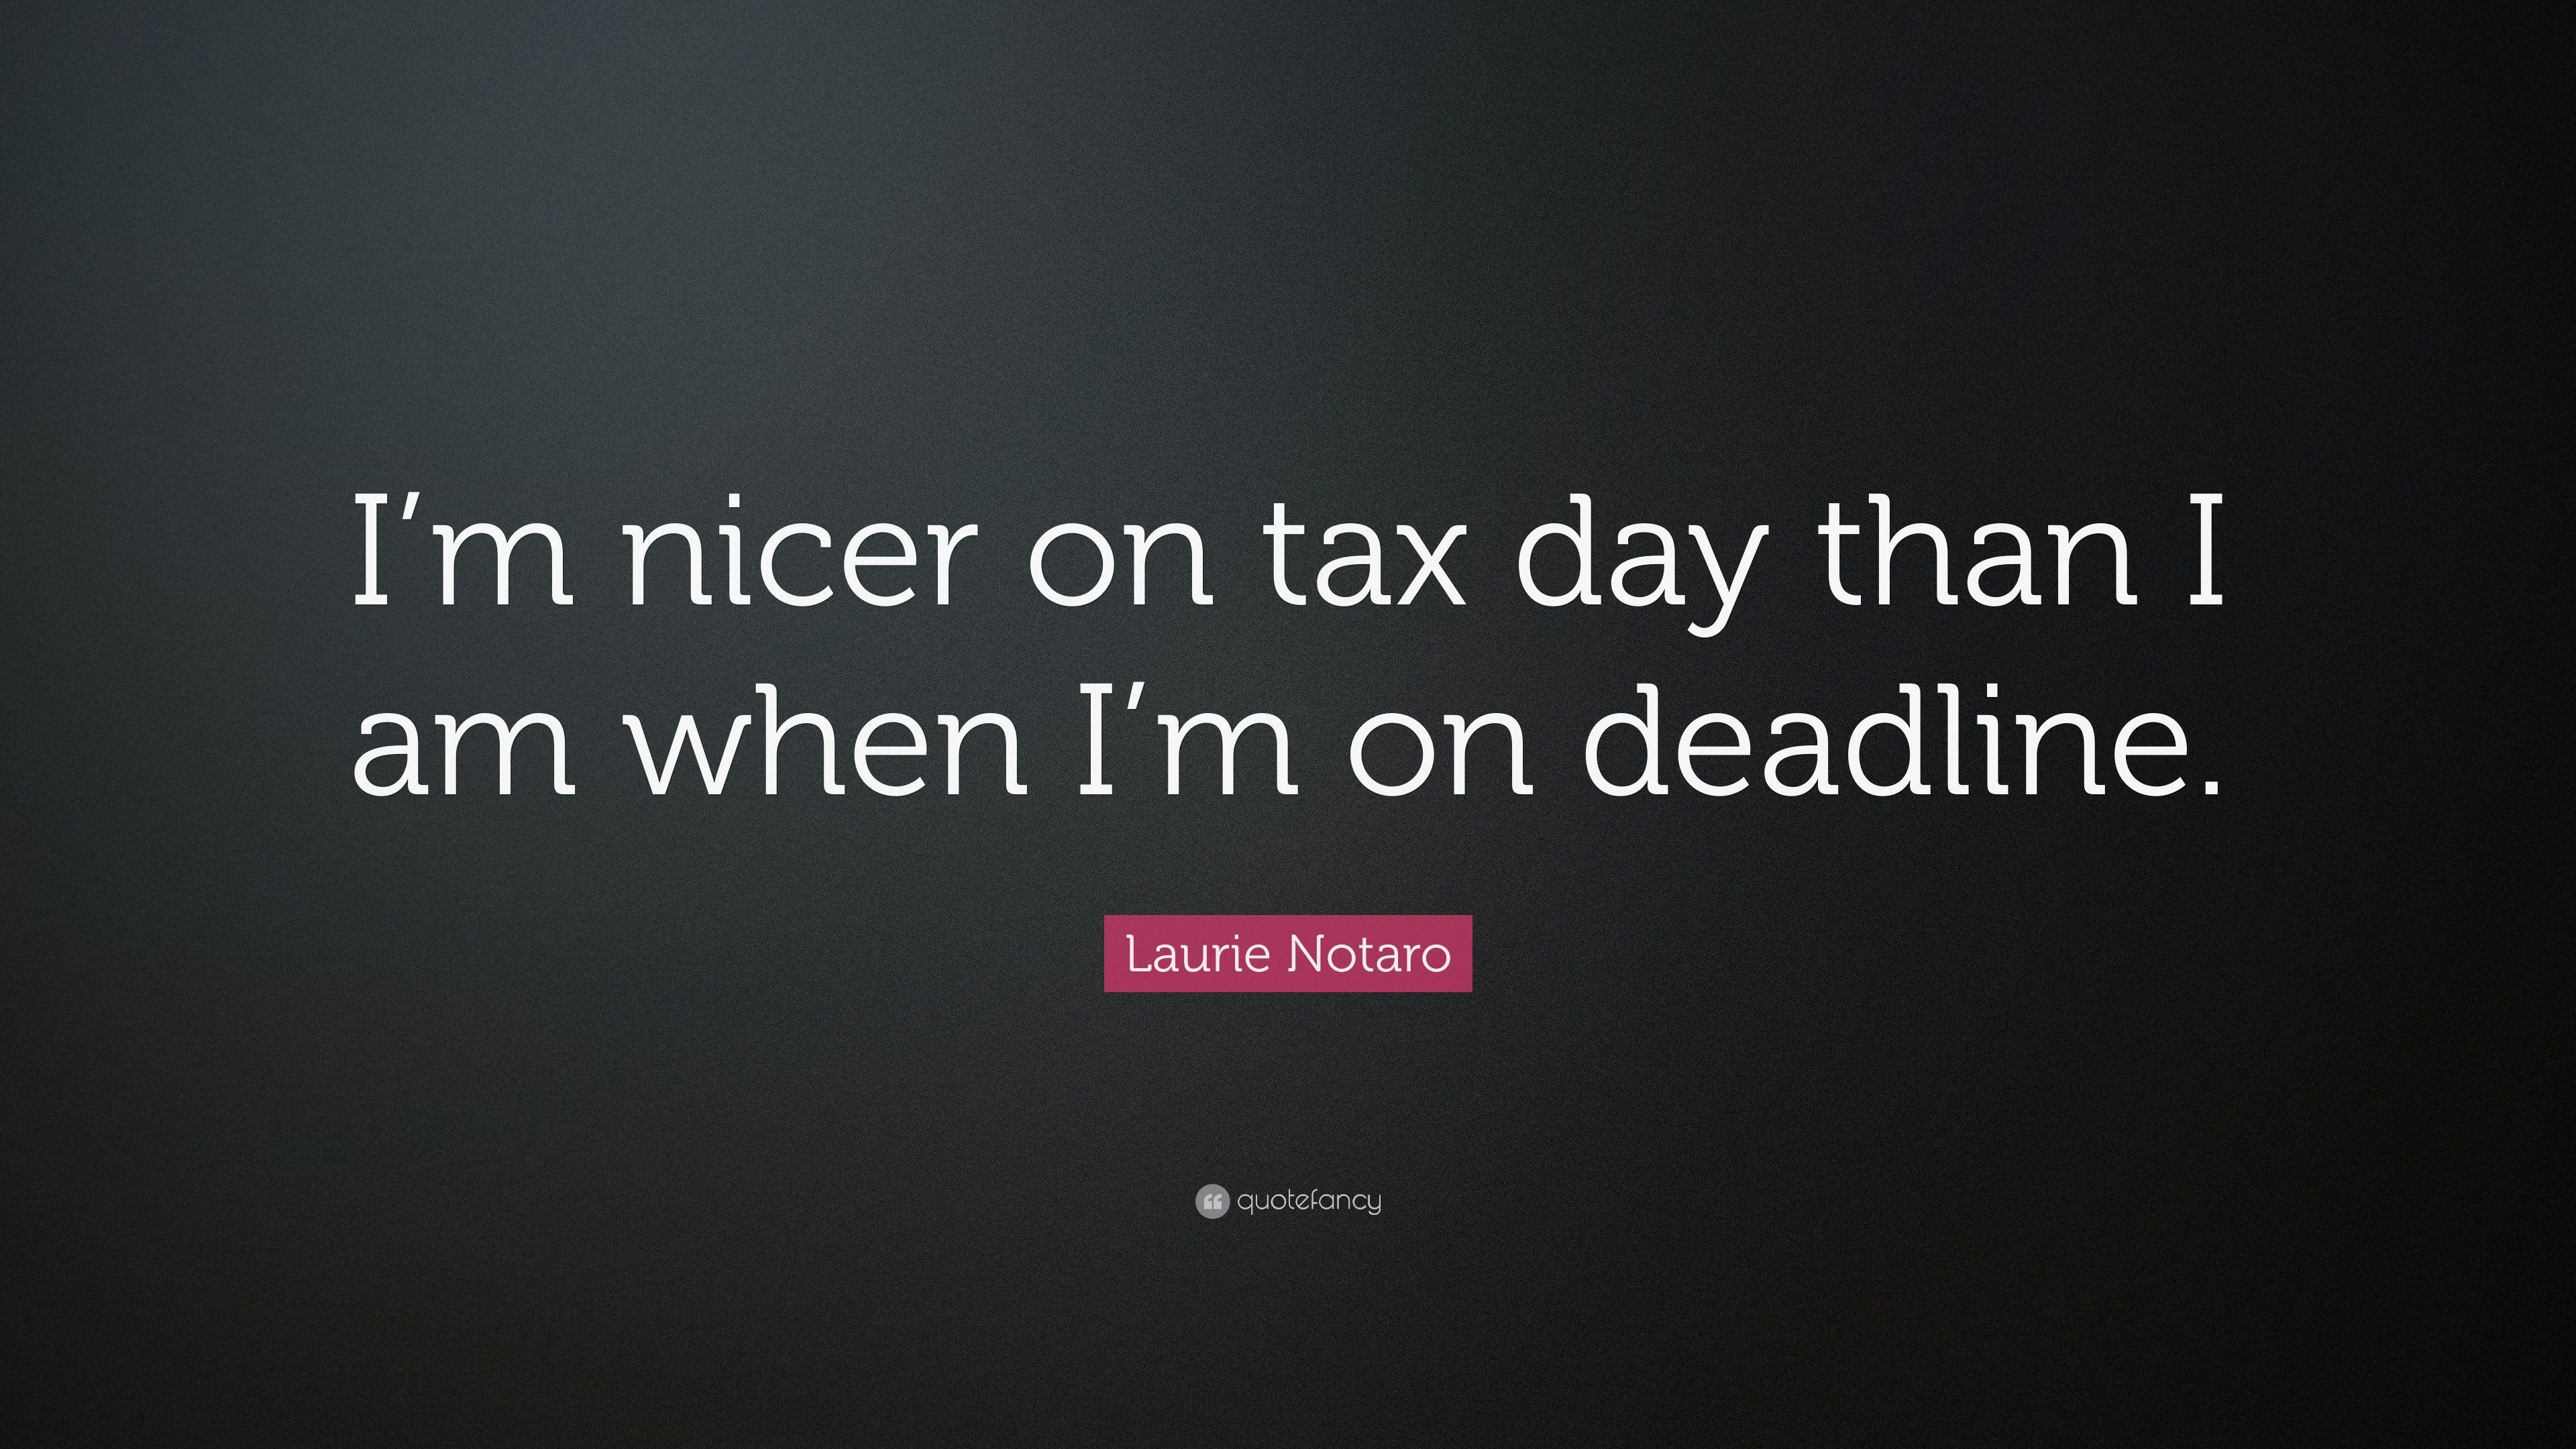 Laurie Notaro Quote: “I'm nicer on tax day than I am when I'm